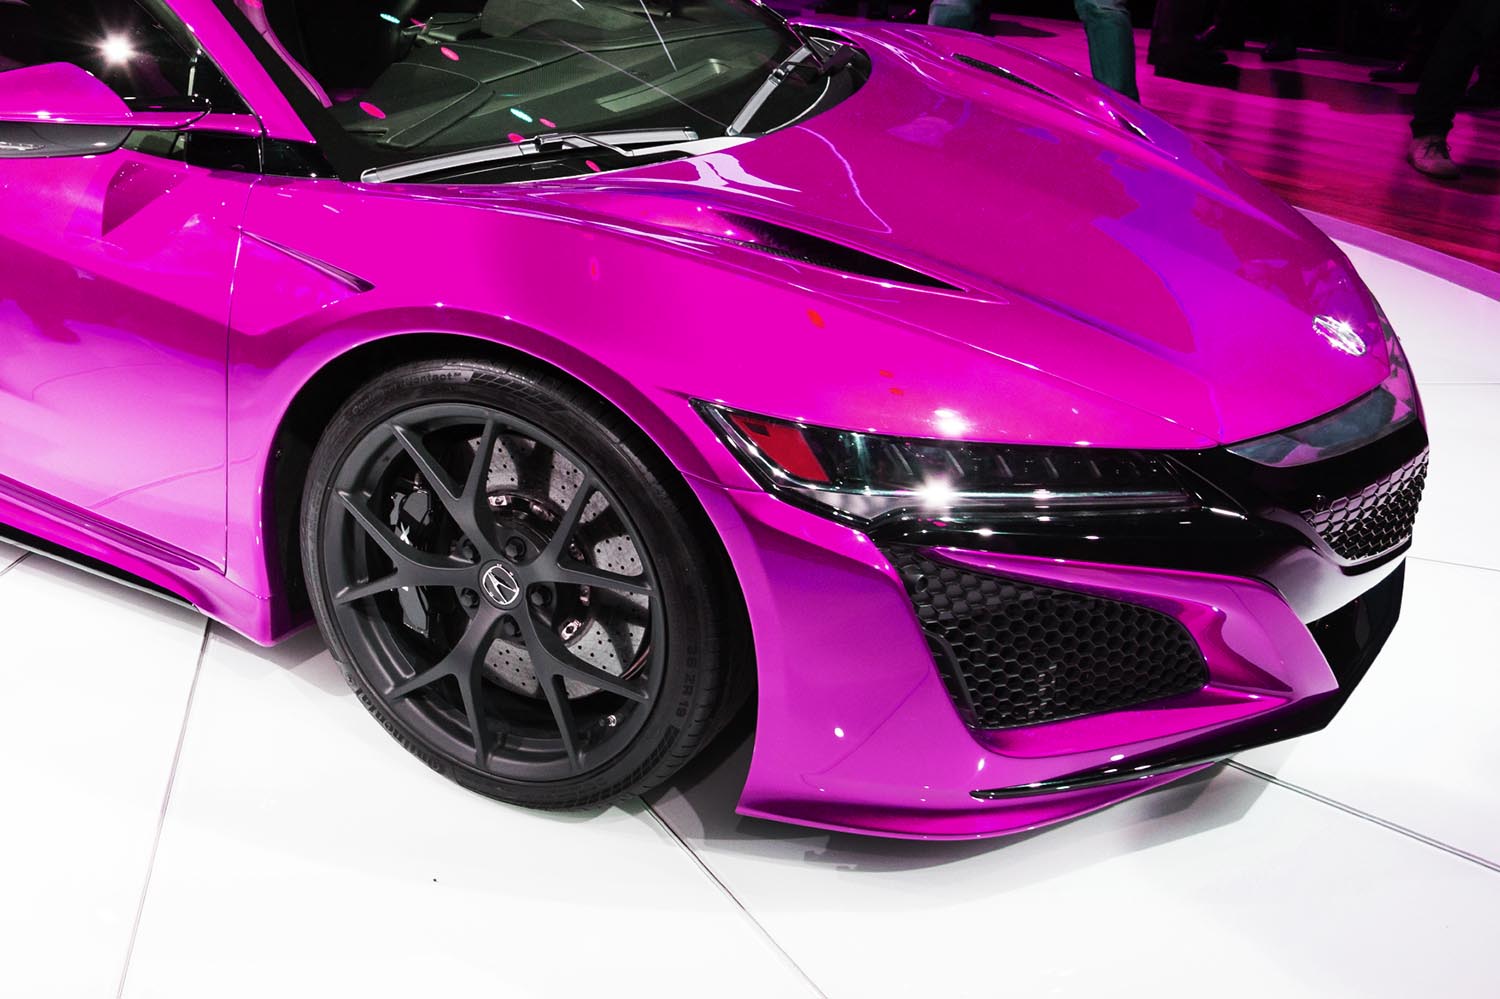 Acura NSX Secrets: 5 Things You Need to Know About The Car